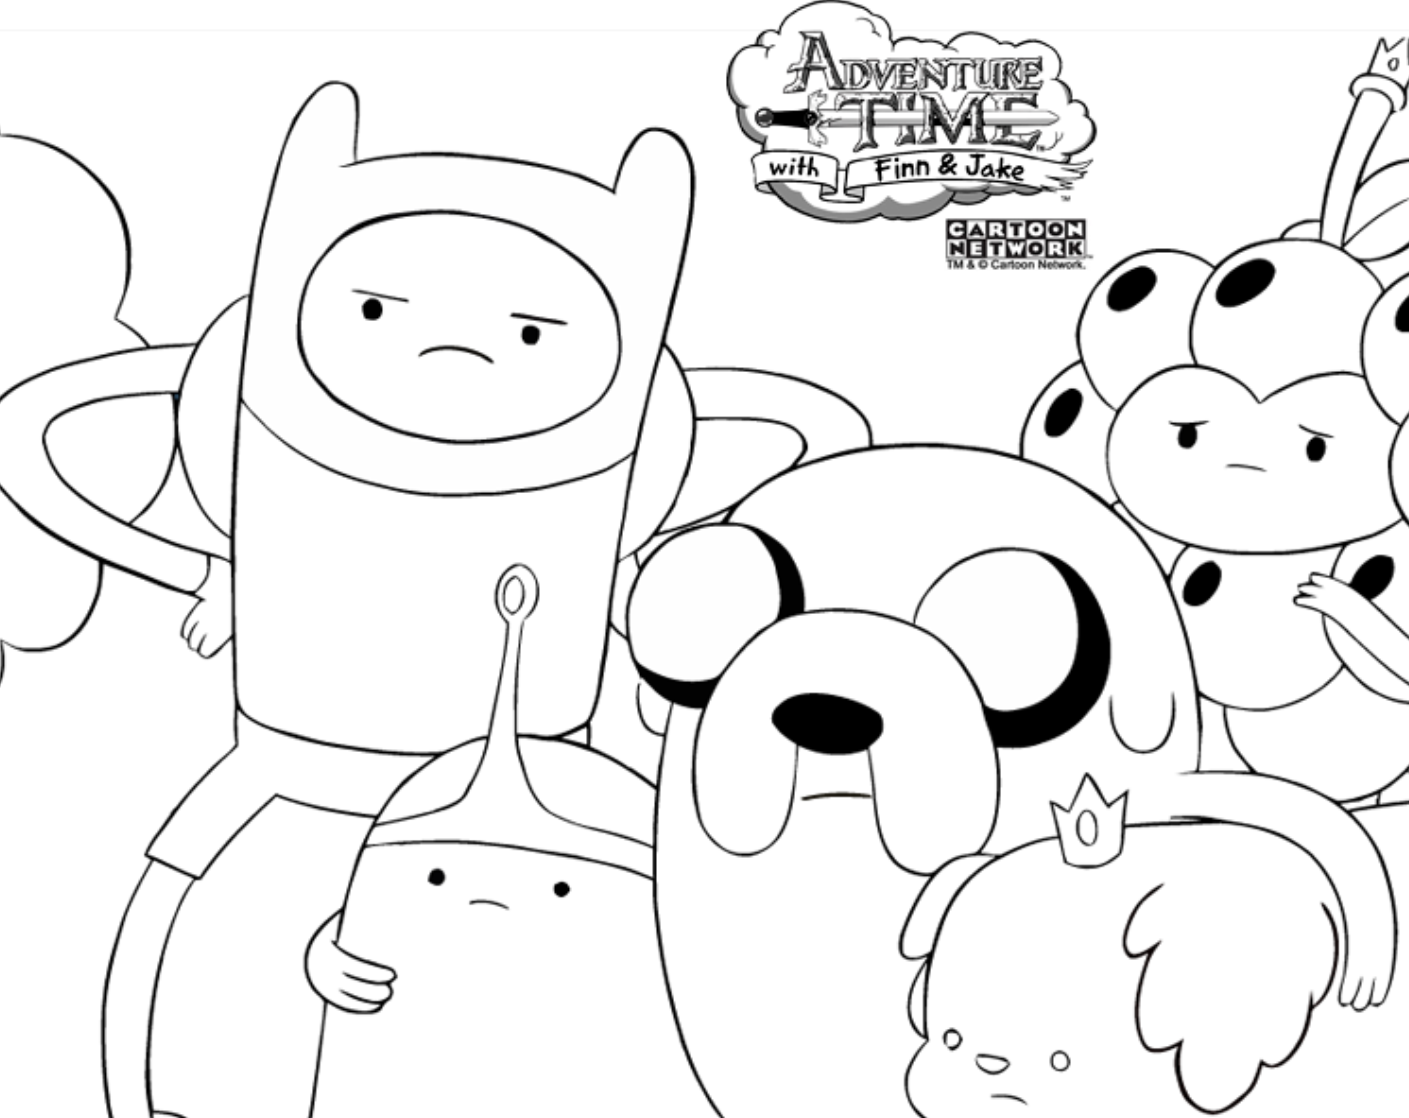 adventure-time coloring pages 13,printable,coloring pages